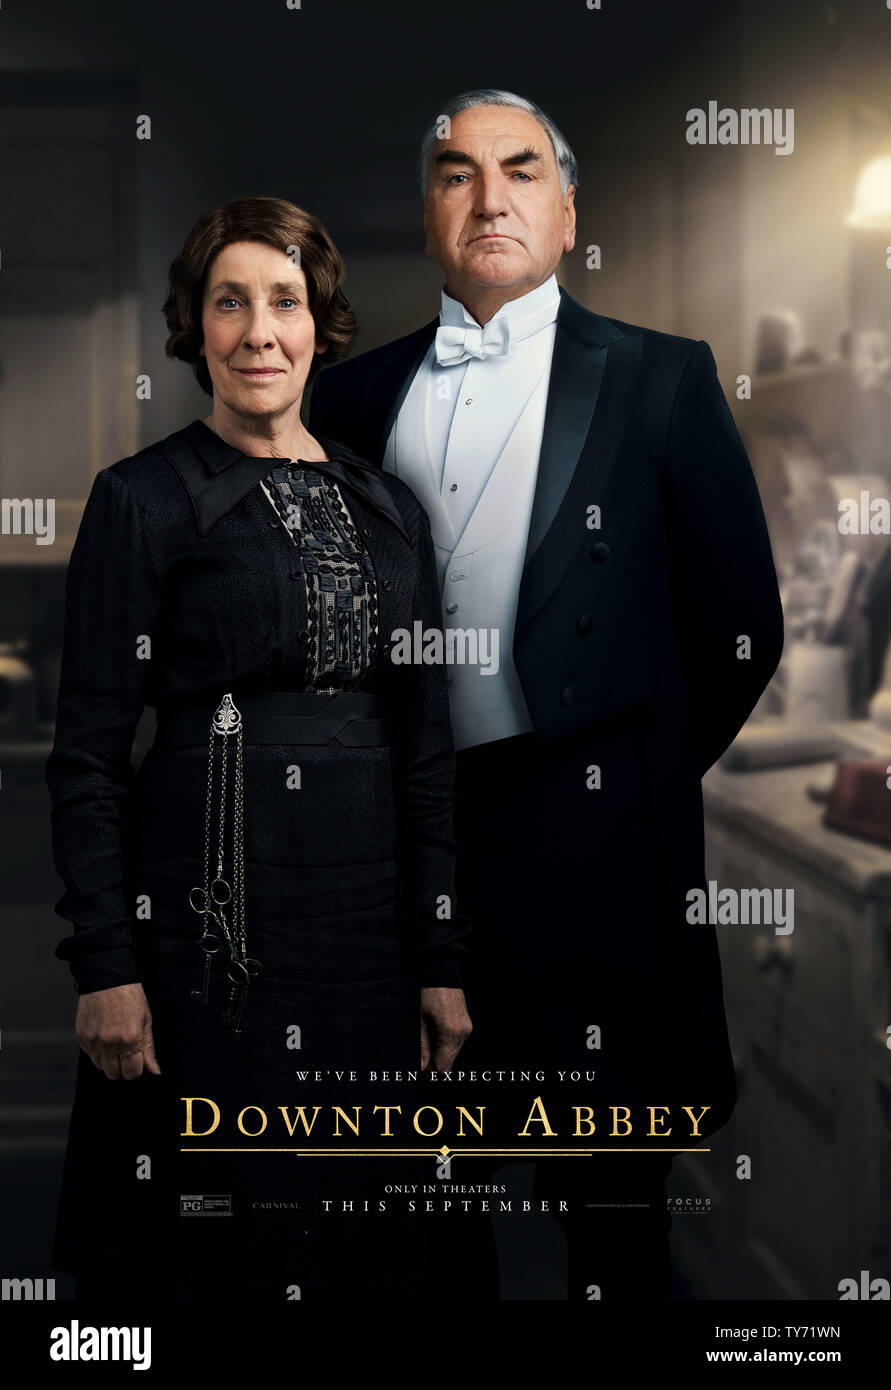 RELEASE DATE: September 20, 2019 TITLE: Downton Abbey STUDIO: Focus Features DIRECTOR: Michael Engler PLOT: Adapted from the hit TV series Downton Abbey that tells the story of the Crawley family, a wealthy owner of a large estate in the English countryside in the early 20th century. STARRING: PHYLLIS LOGAN as Mrs, Hughes, JIM CARTER as Charles Carson. (Credit Image: © Focus Features/Entertainment Pictures) Stock Photo